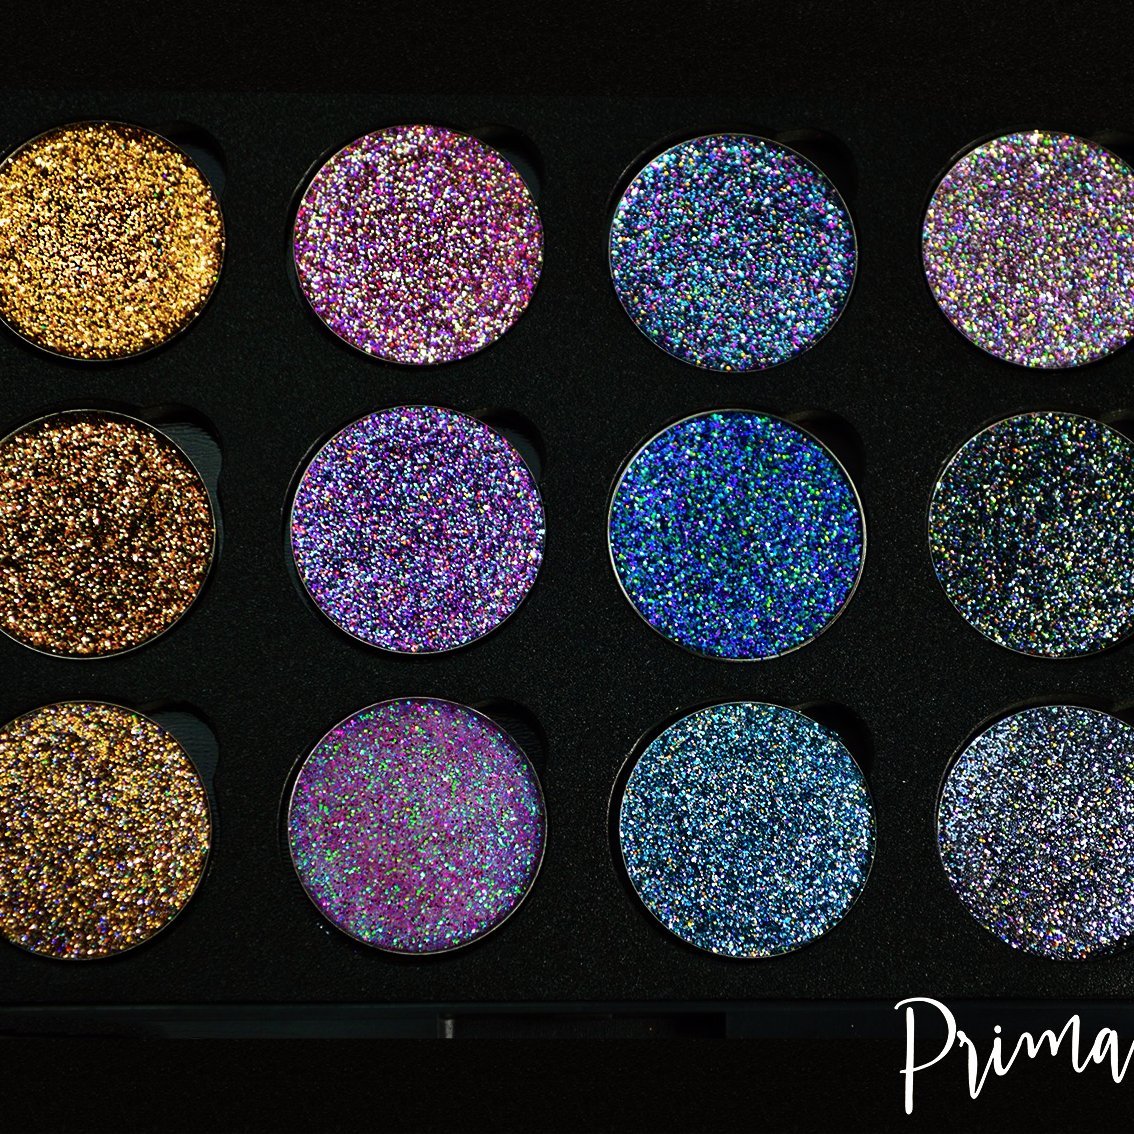 Prima Makeup Colour Shifting Pressed Glitter Eyeshadow Lips Set - Chameleon Collection